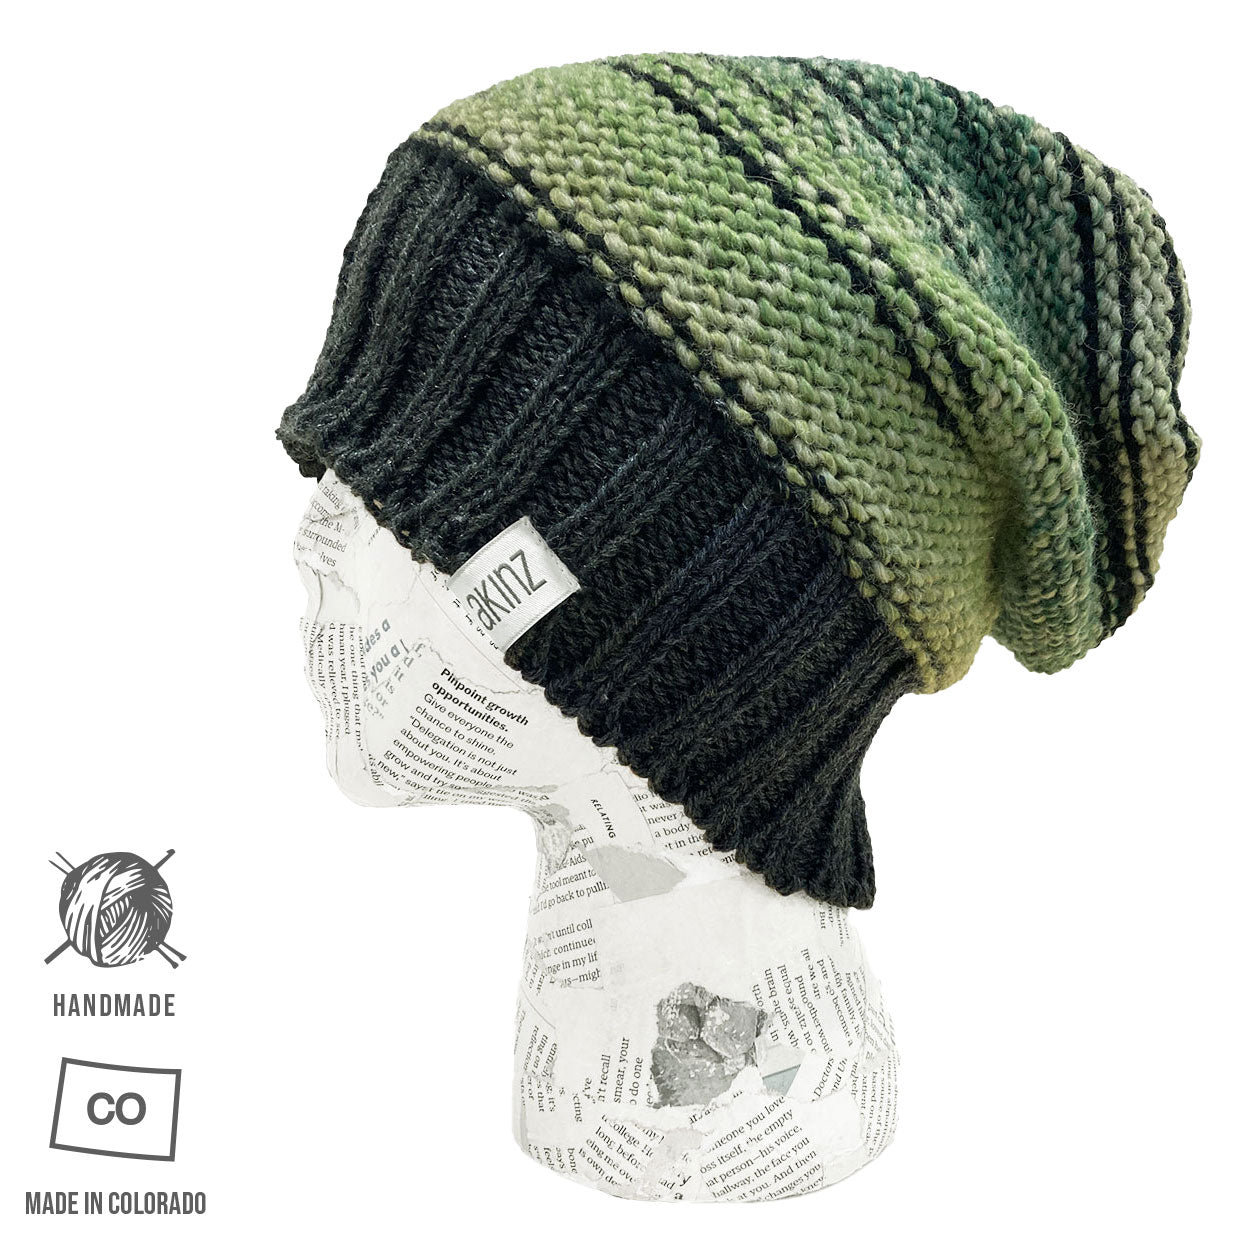 Colorado Beanies: Handmade Slouch & Pom Hats | Knit Hooded Cowls 